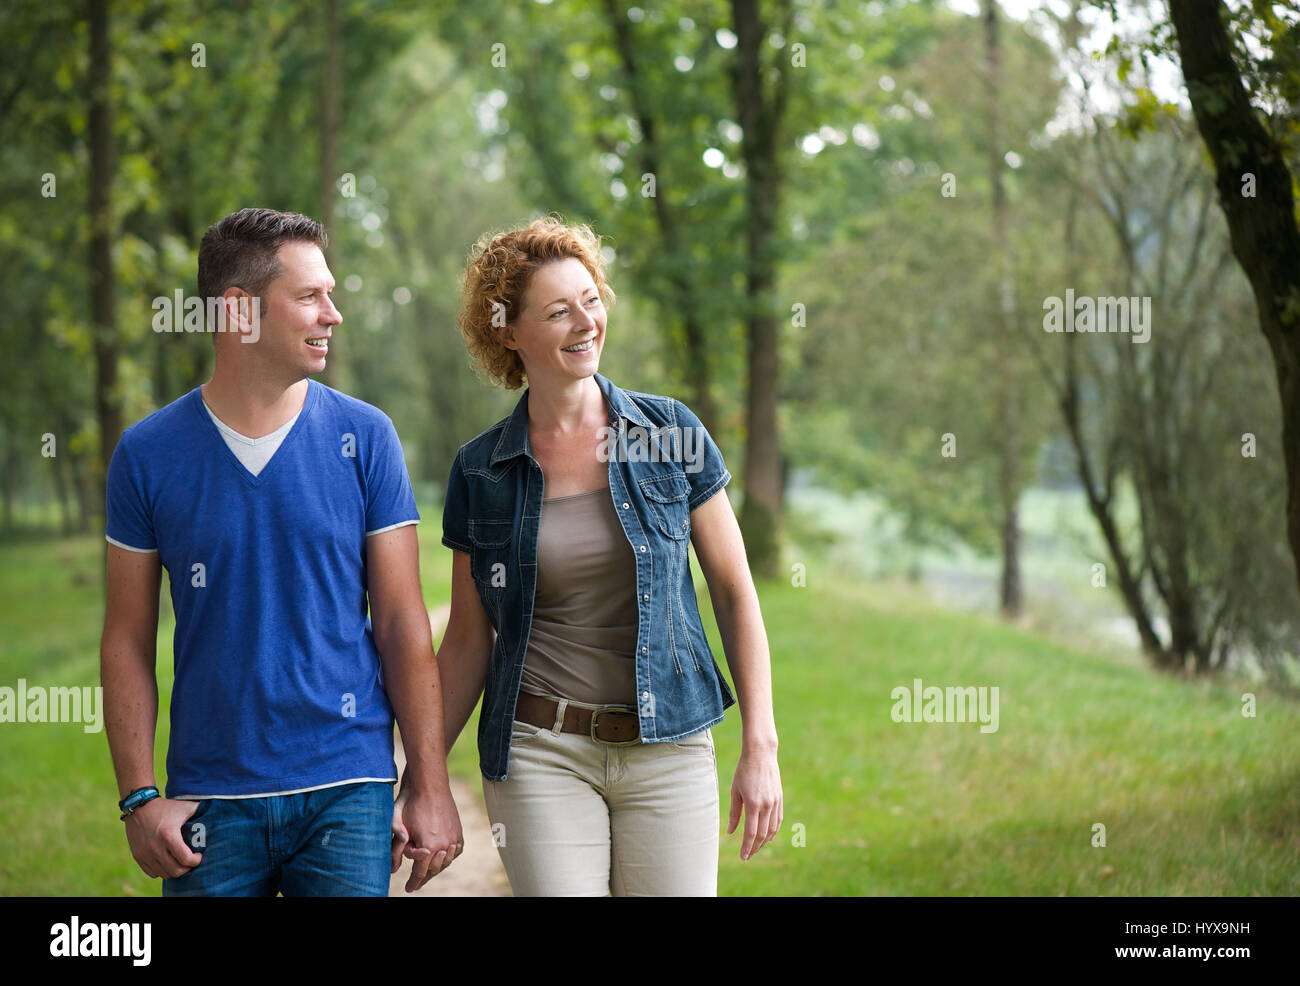 Portrait of a happy couple walking together outdoors Stock Photo